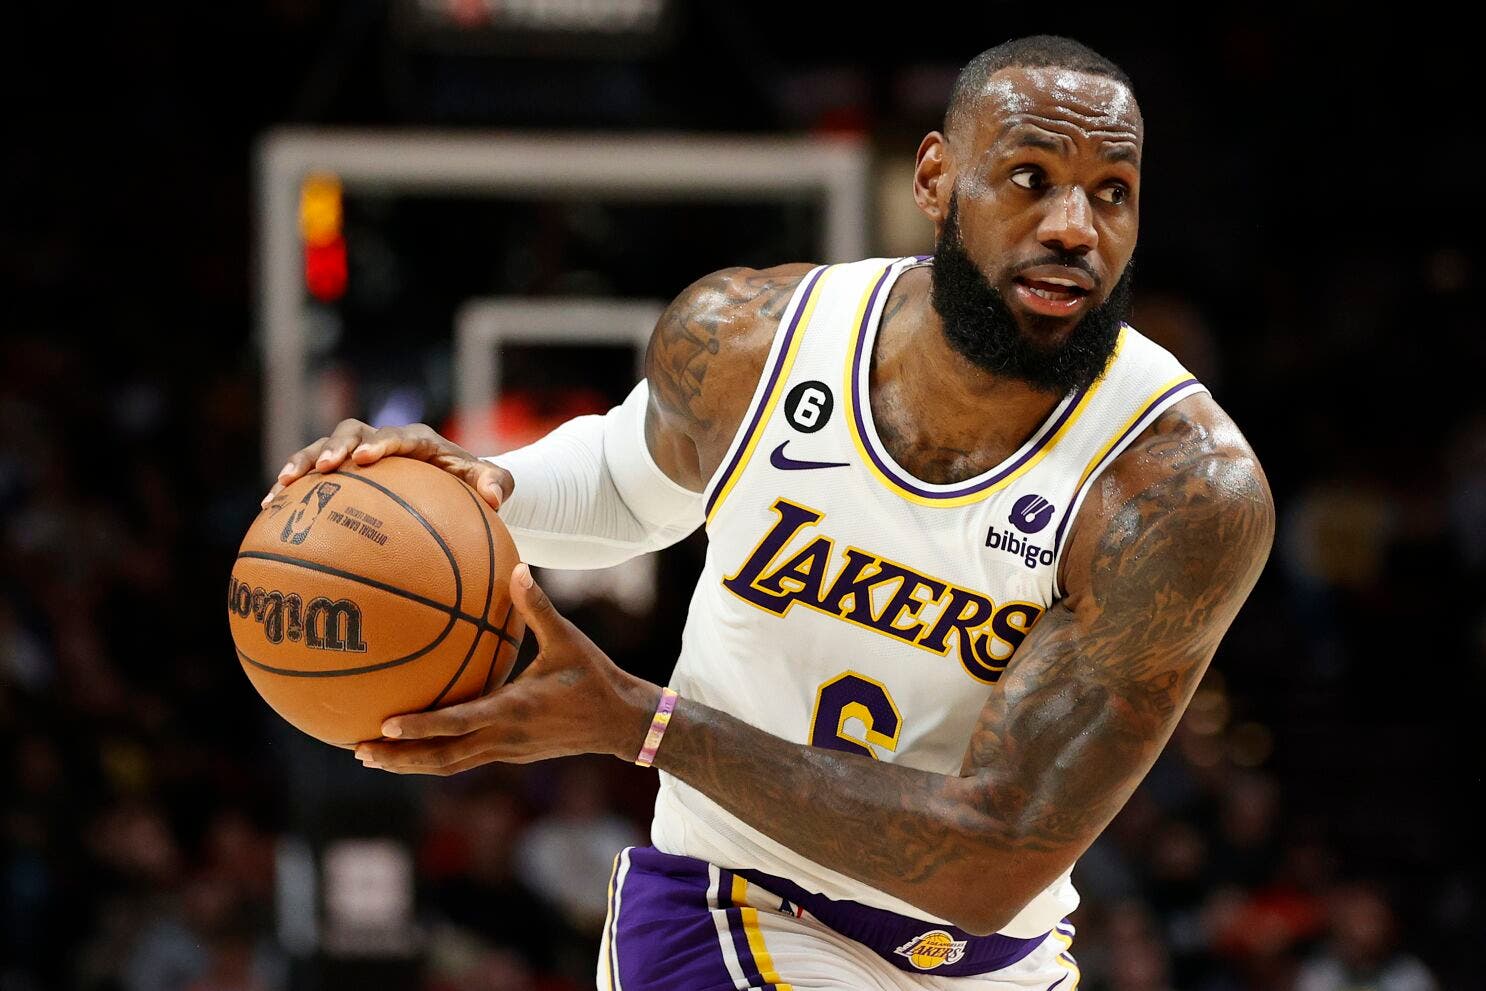 The team that wants to get LeBron James out of the Los Angeles Lakers
	
